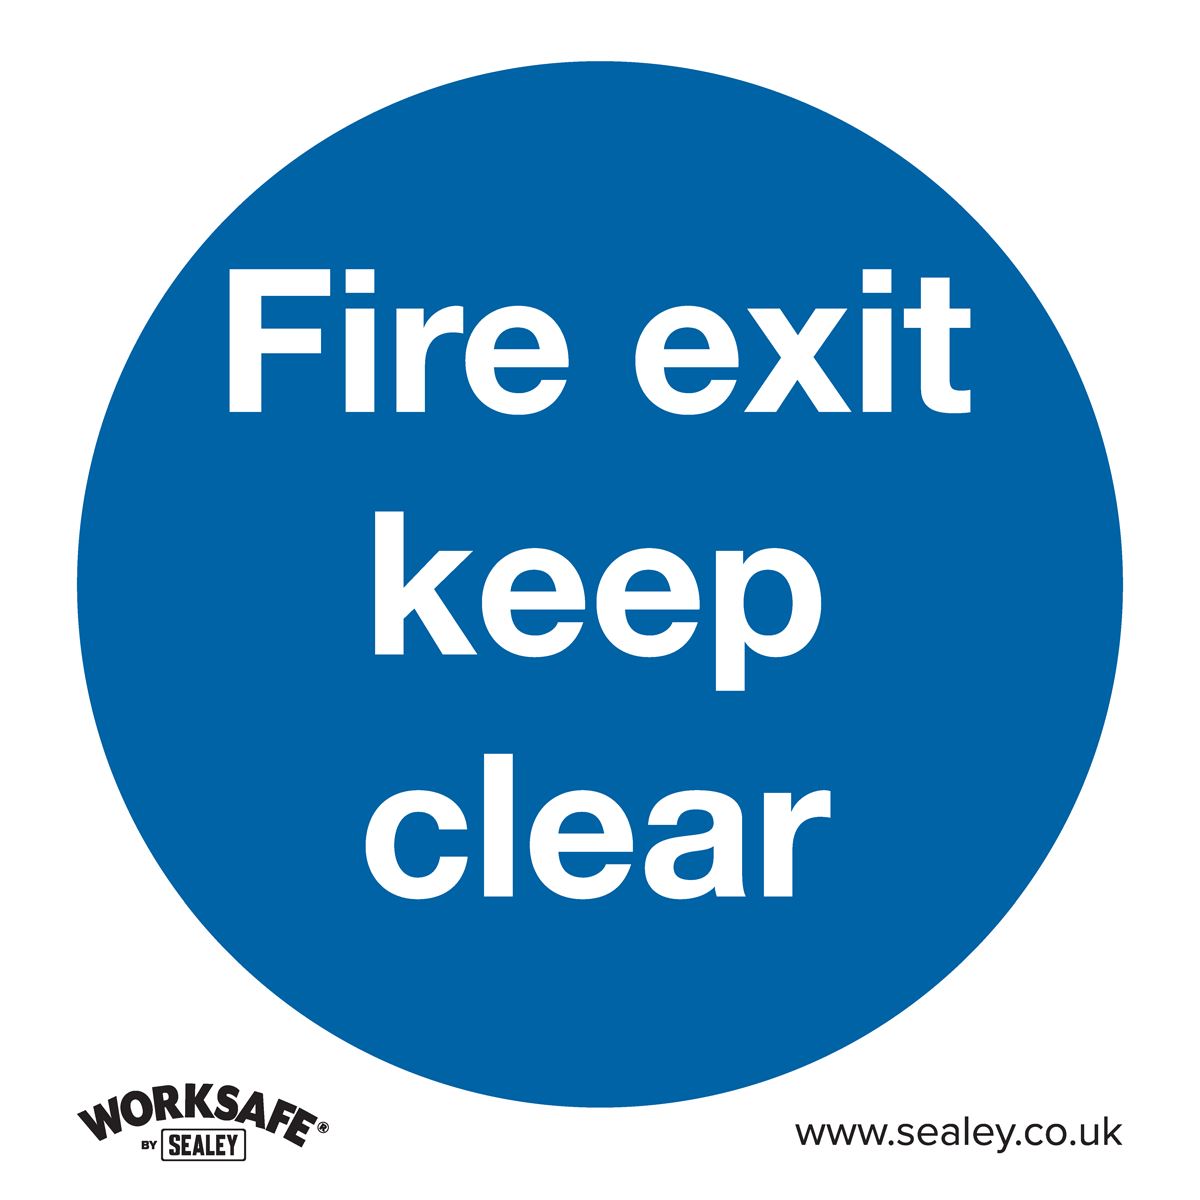 Worksafe by Sealey Mandatory Safety Sign - Fire Exit Keep Clear - Rigid Plastic